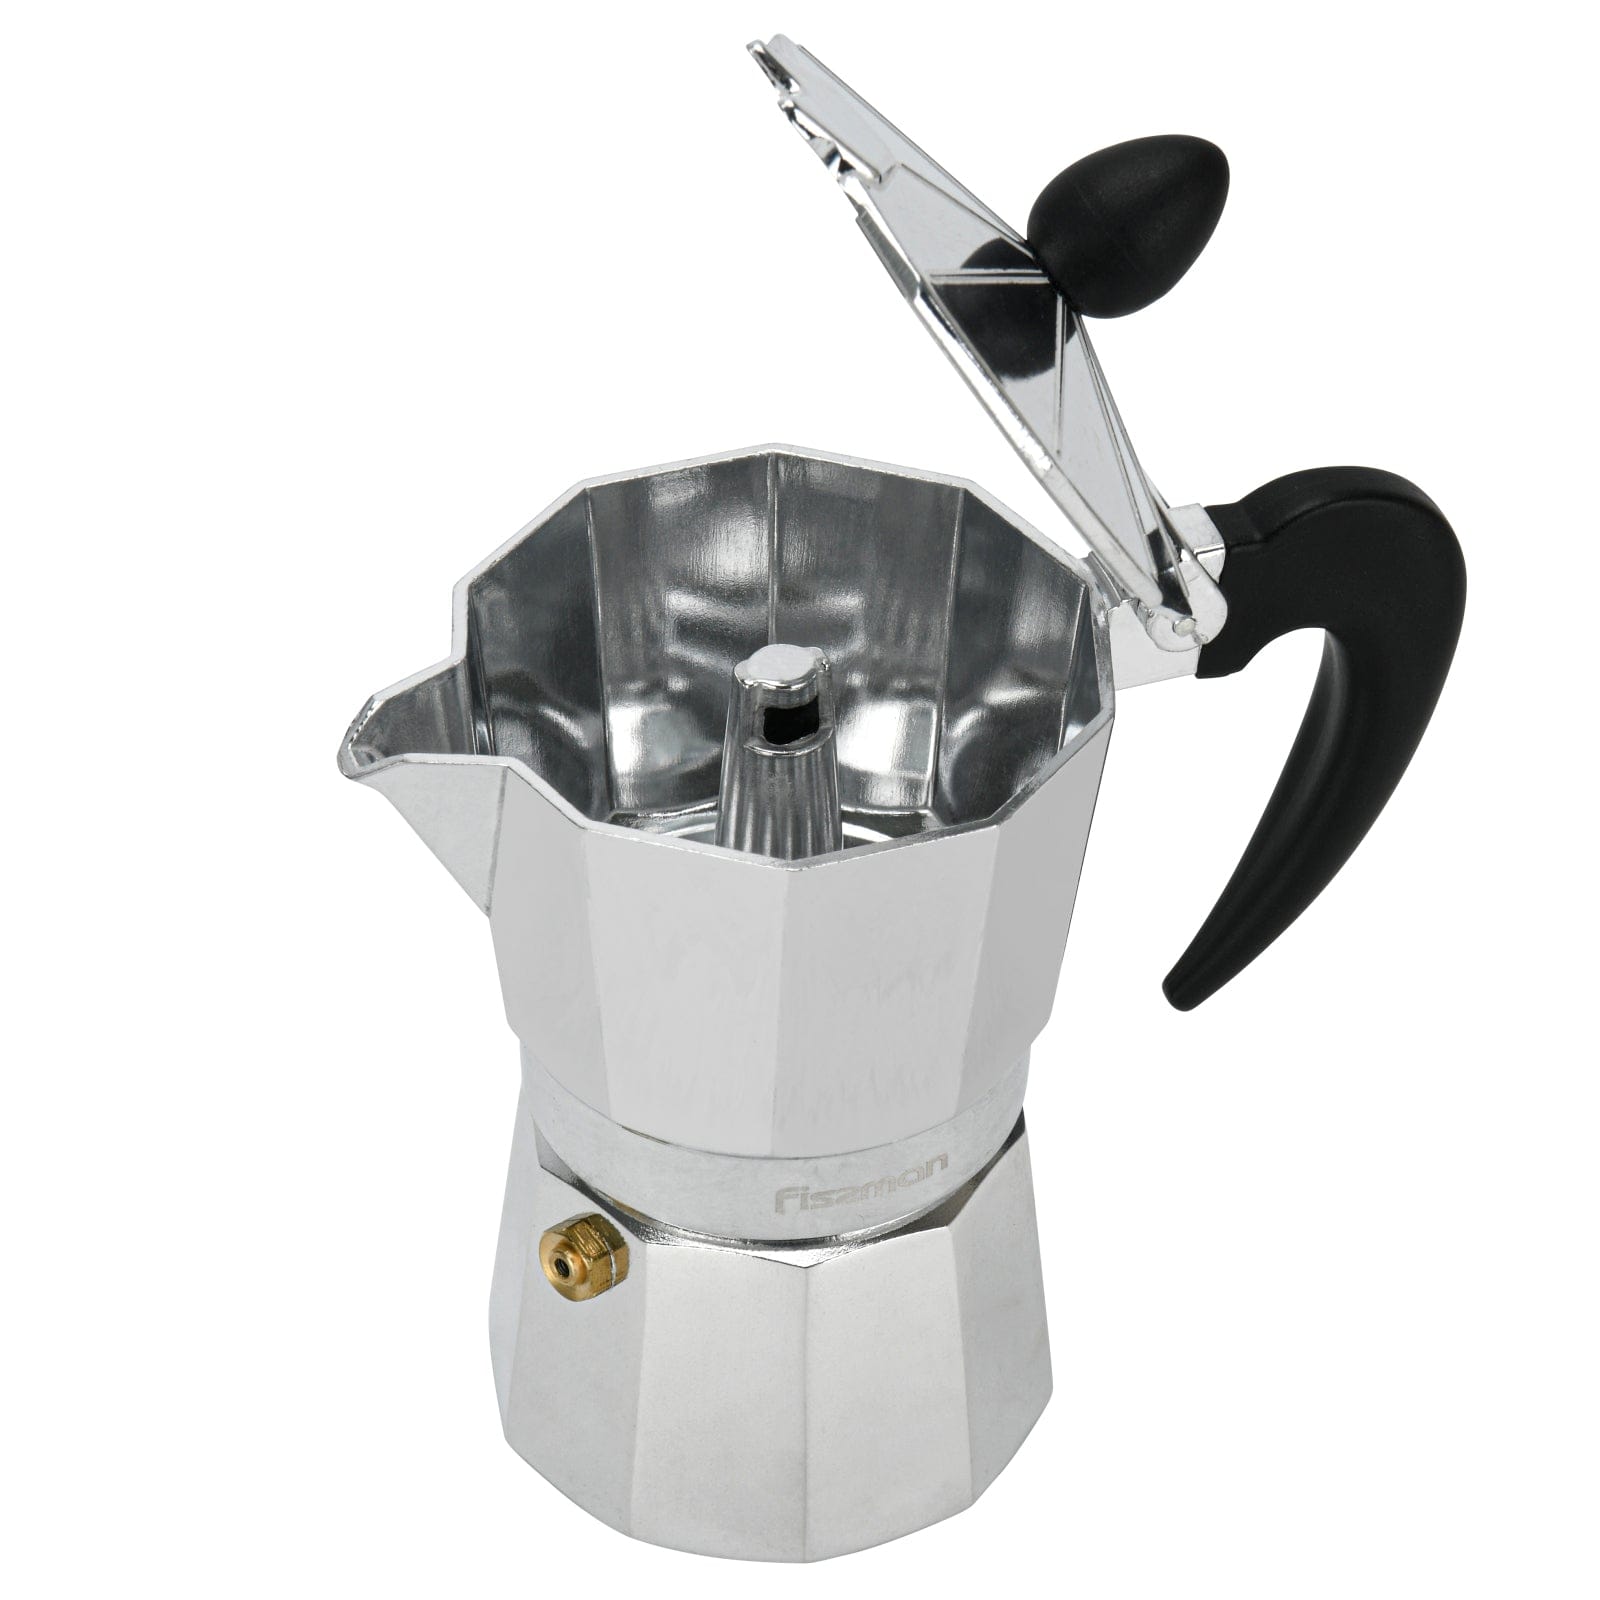 Fissman Set Of Coffee Maker Aluminium For 2 Cups/120ml And 2 Ceramic Cups With 2 Saucers Set